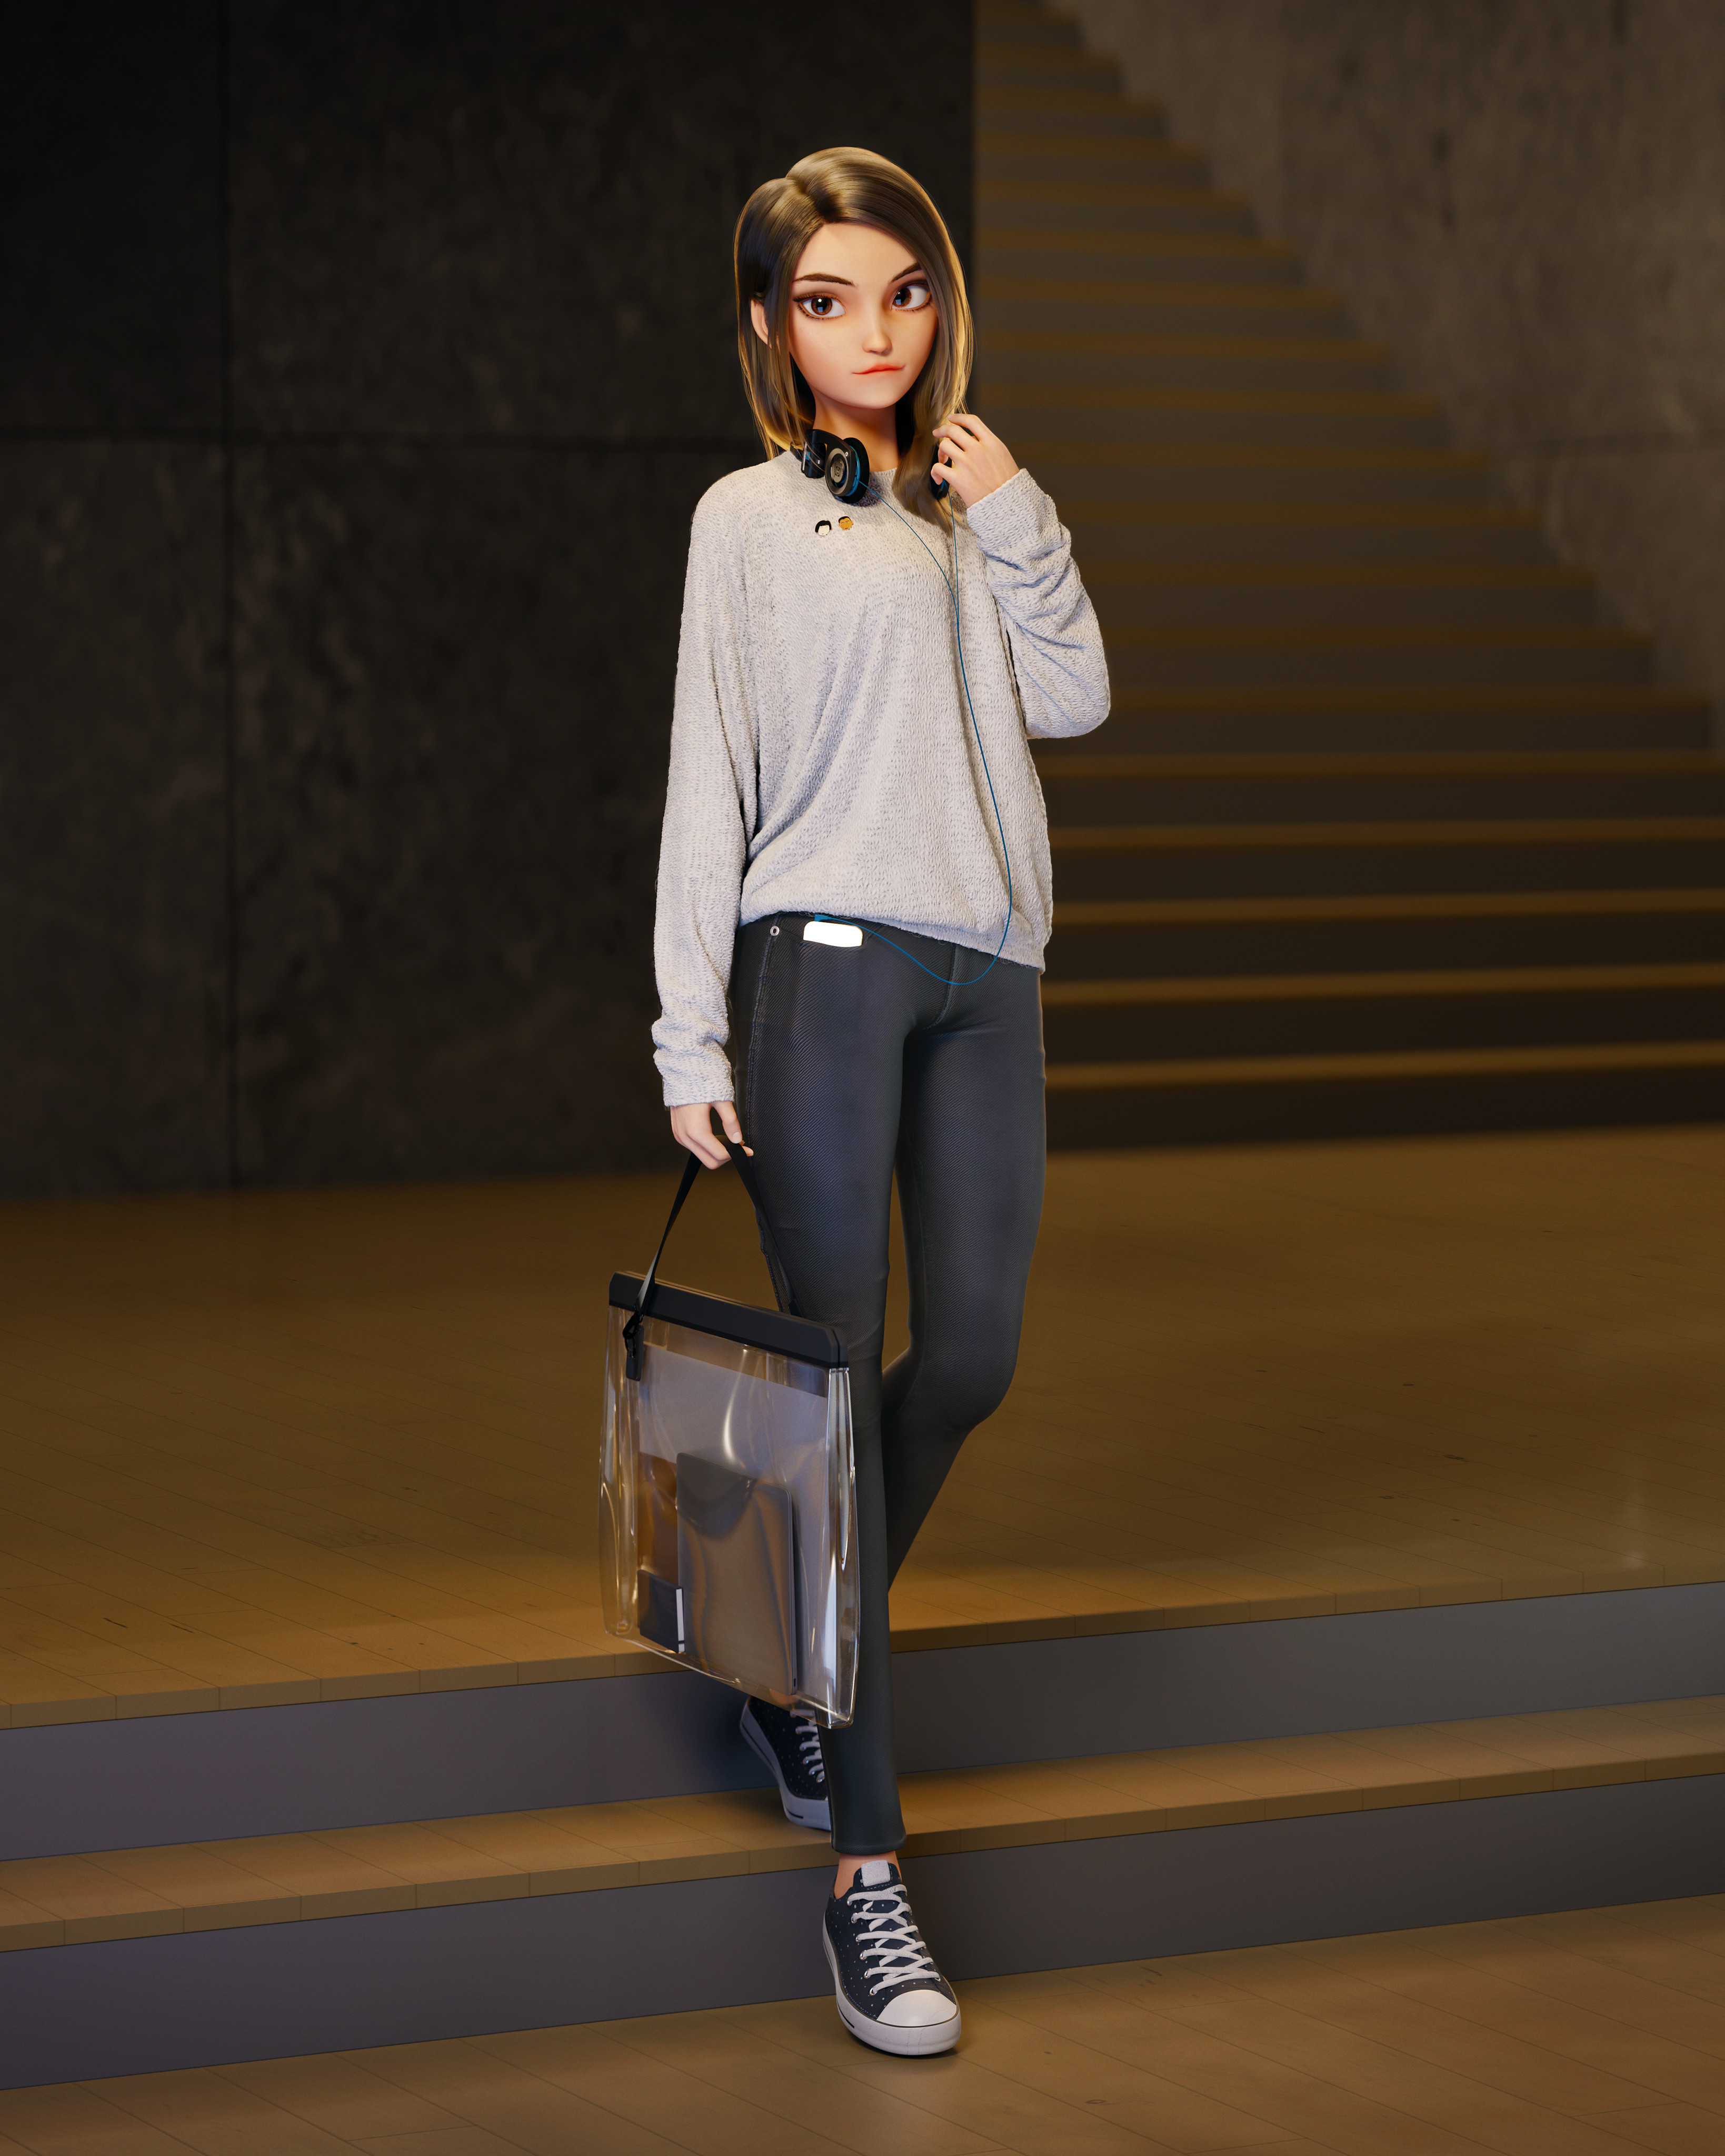 Young Woman Staircase Women Stairway Digital Art Stairs Digital Painting Sweater Looking At The Side 3277x4096